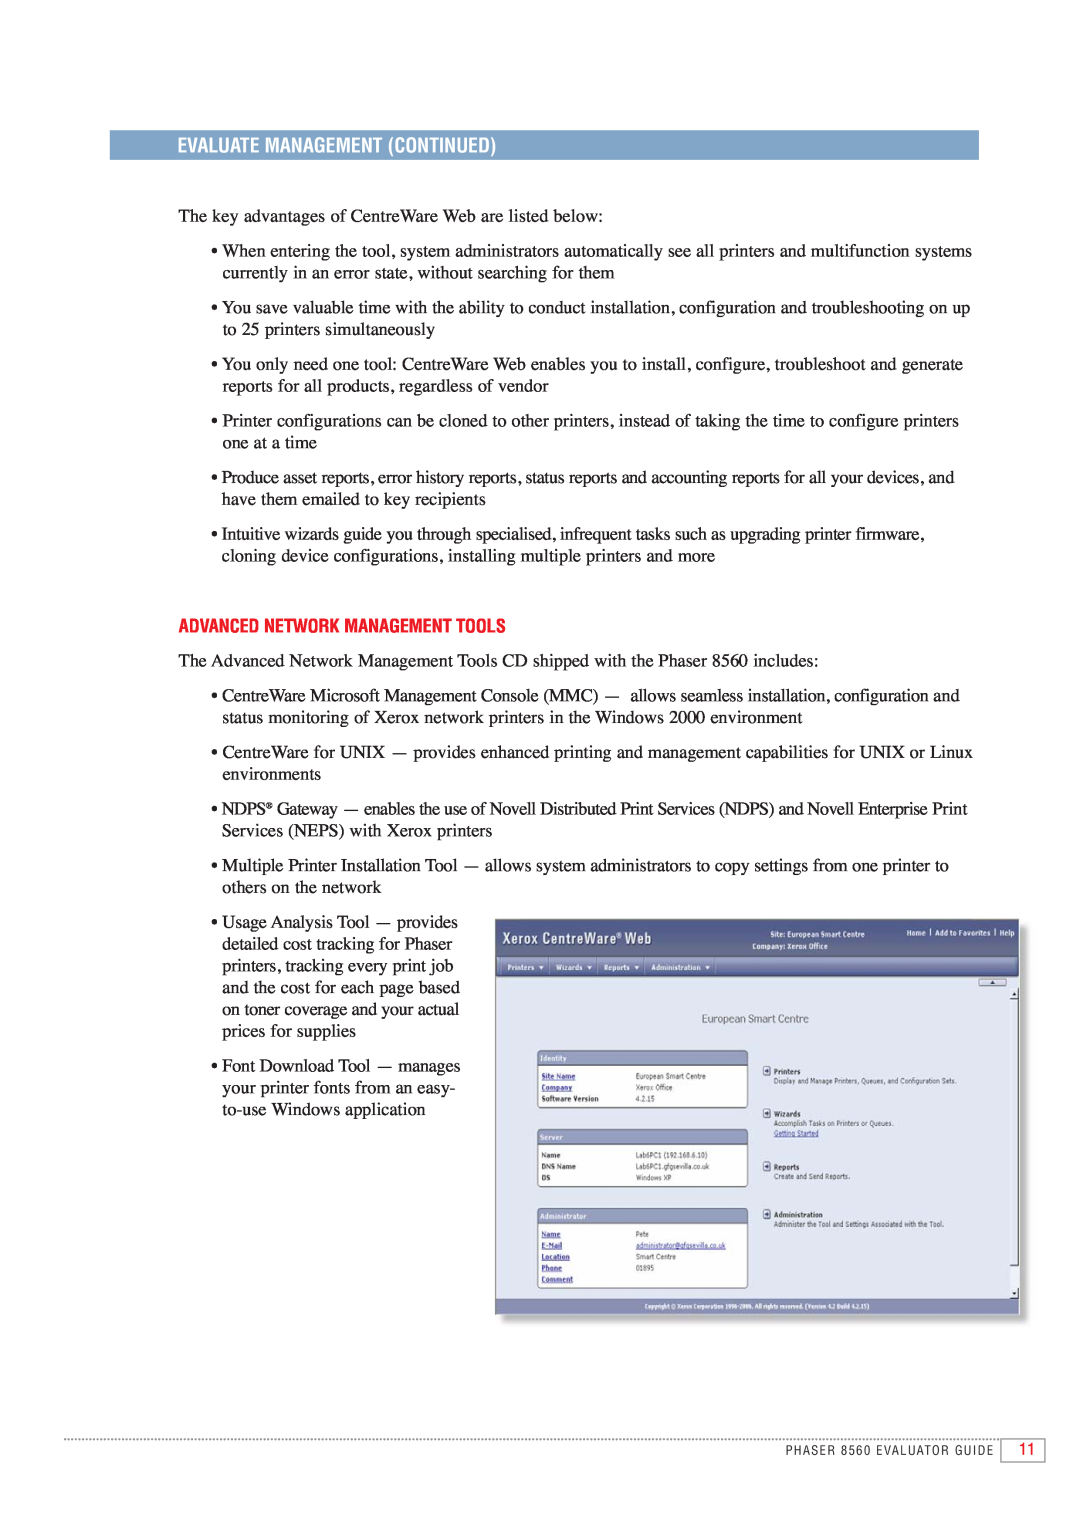 Xerox 8560 manual Evaluate Management Continued, Advanced Network Management Tools 